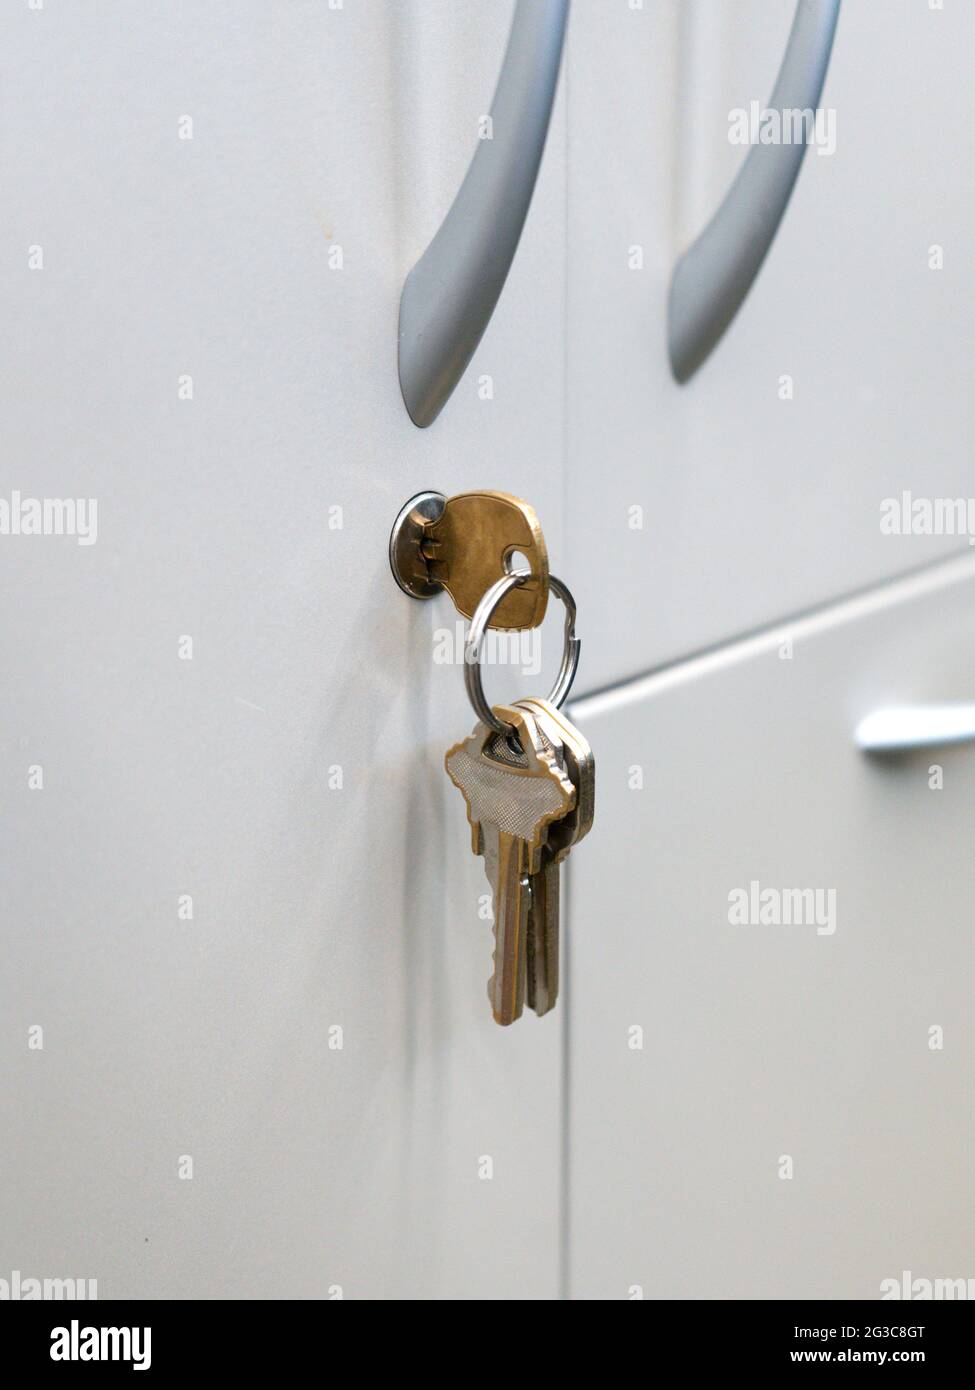 Close up focused on Keys in an office cabinets lock Stock Photo